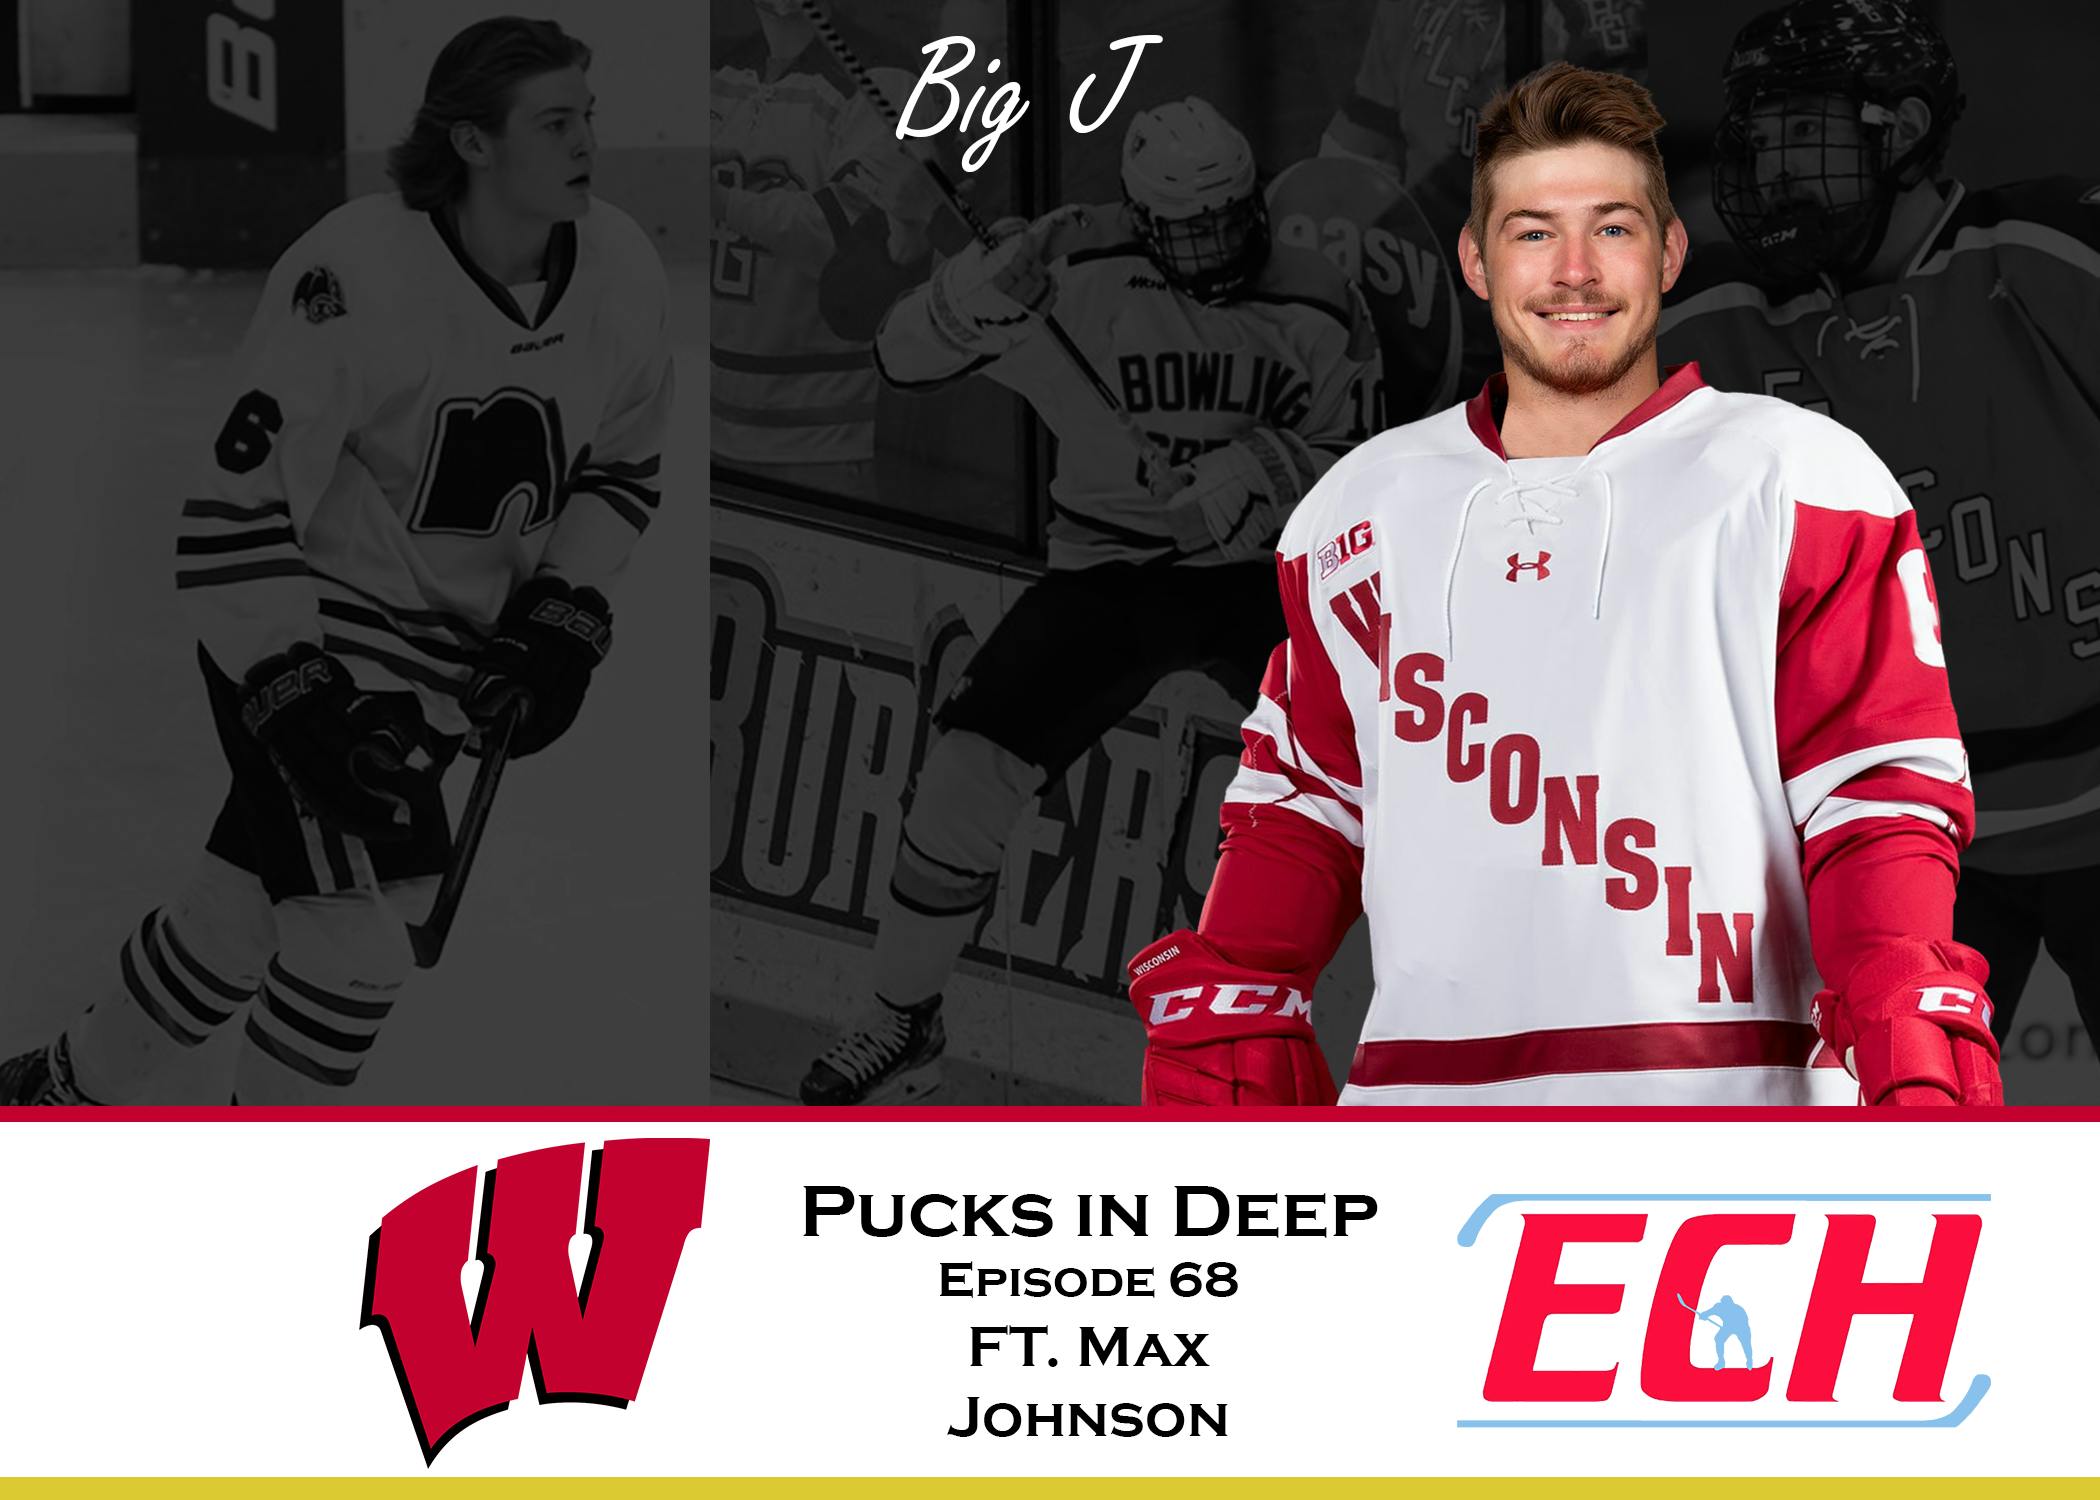 Episode #68 of Pucks in Deep Feat: Max Johnson